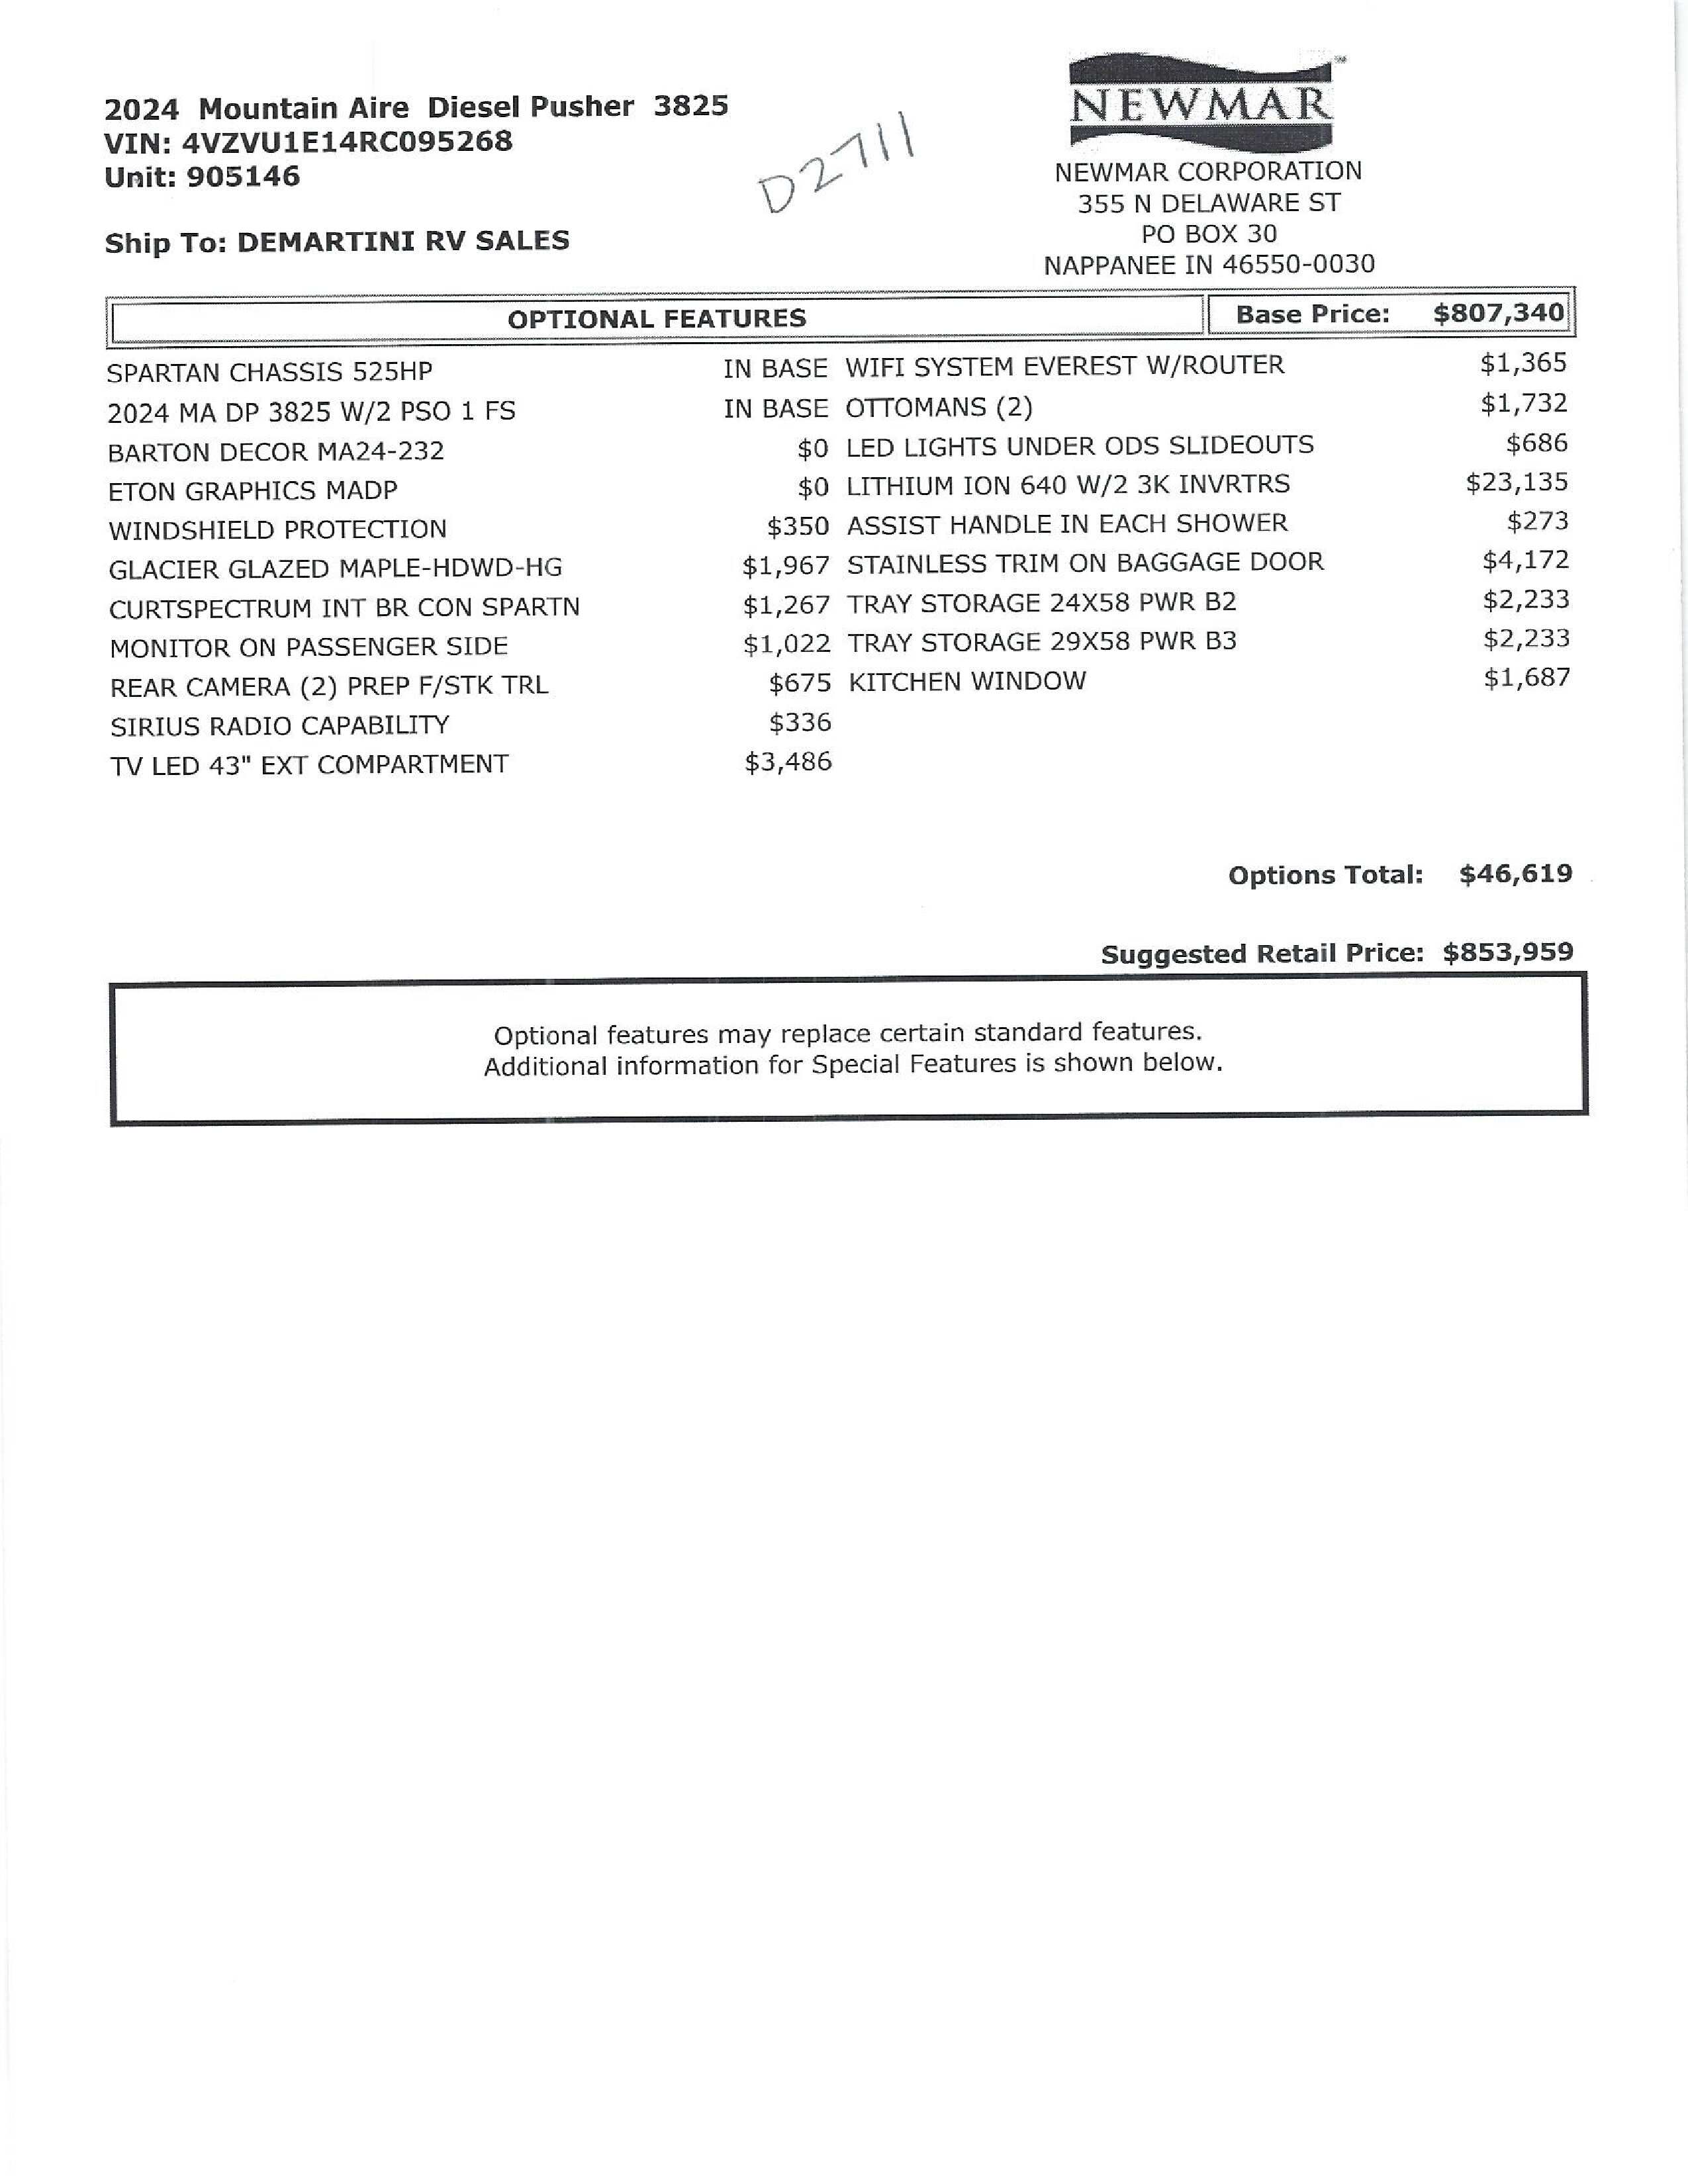 2024 Newmar Mountain Aire 3825 MSRP Sheet